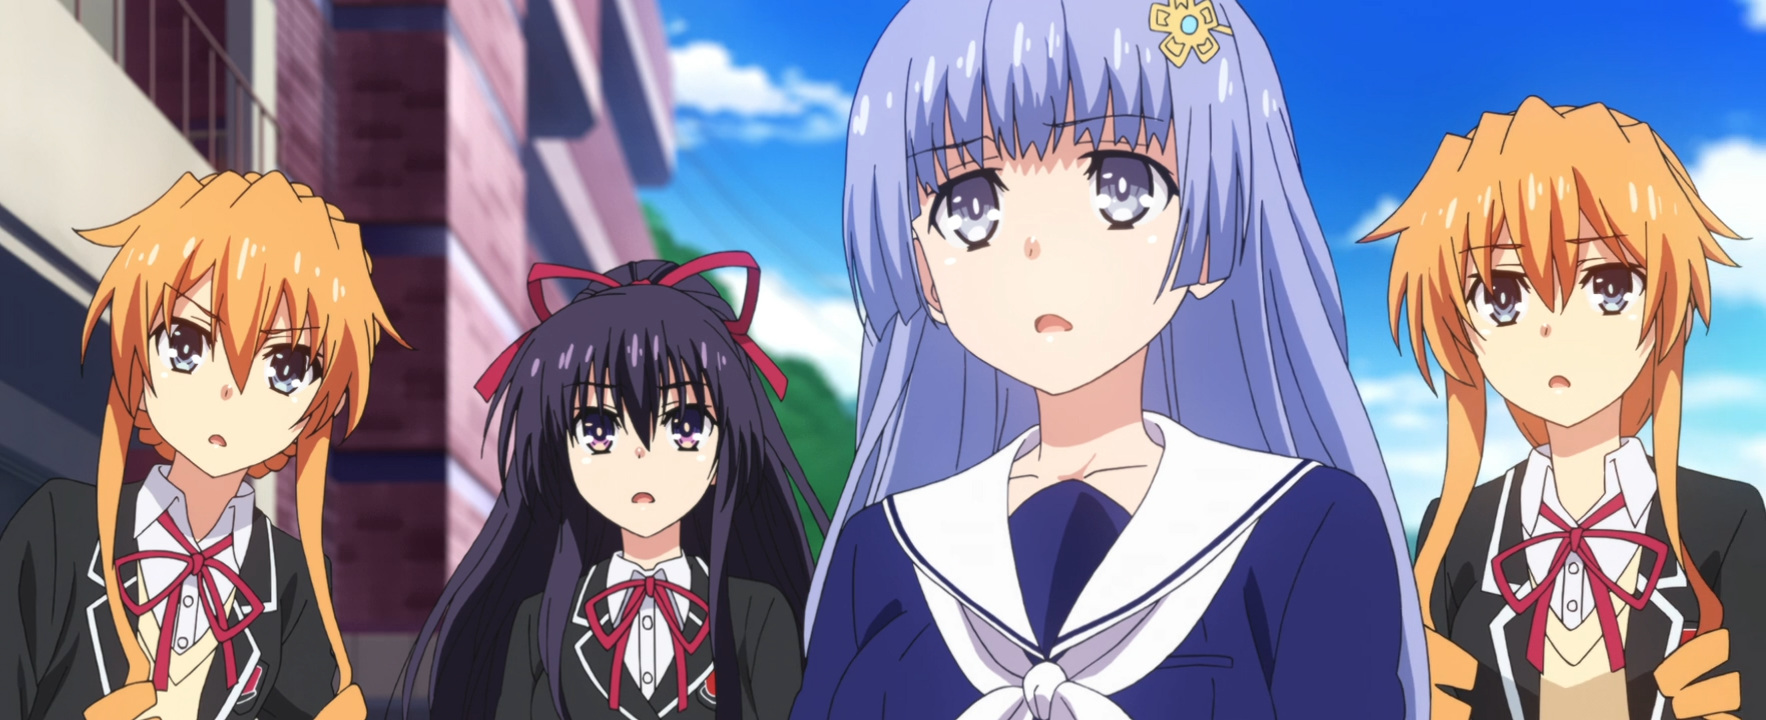 Date A Live III T.V. Media Review Episode 6 Anime Solution.